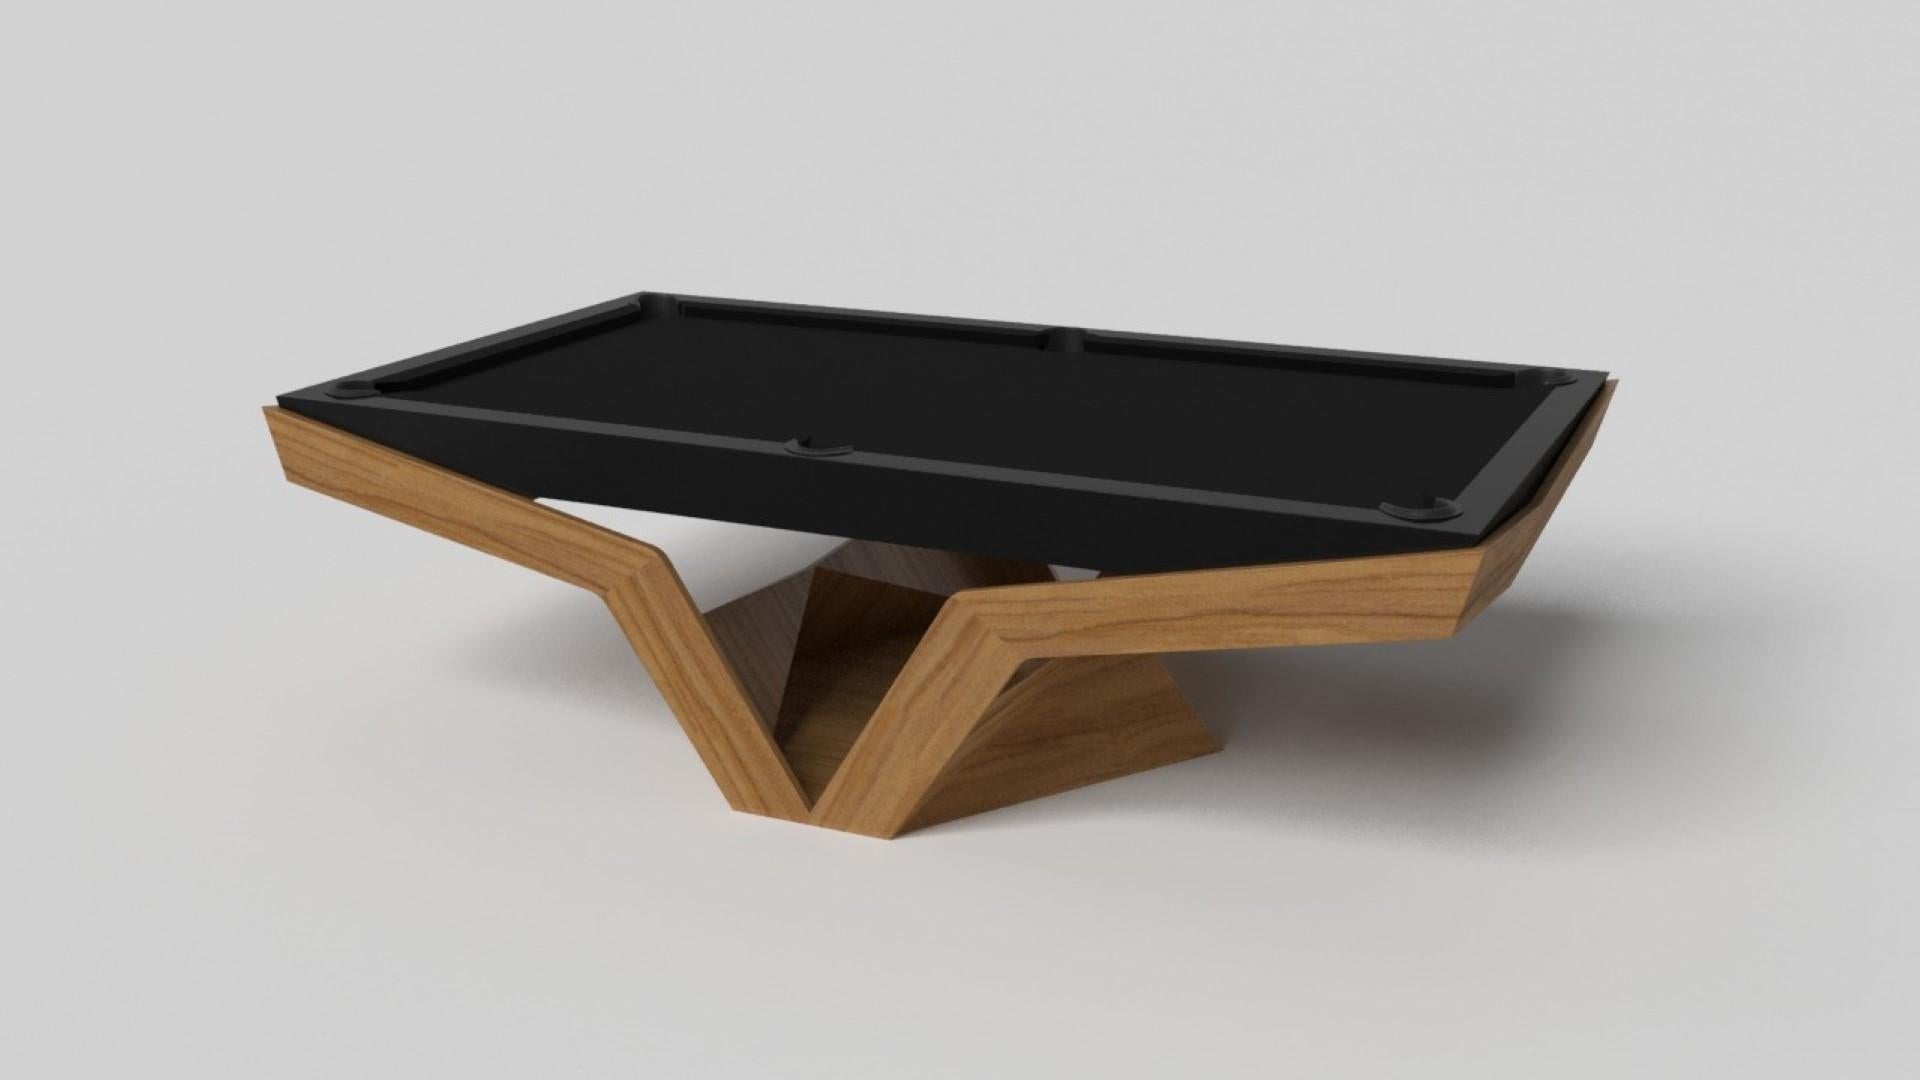 The Enzo pool table is Inspired by the aerodynamic angles of top-of-the-line European vehicles. Designed with sleek, V-shaped lines and a thoughtful use of negative space, this table boasts an energetic sense of spirit while epitomizing the look of